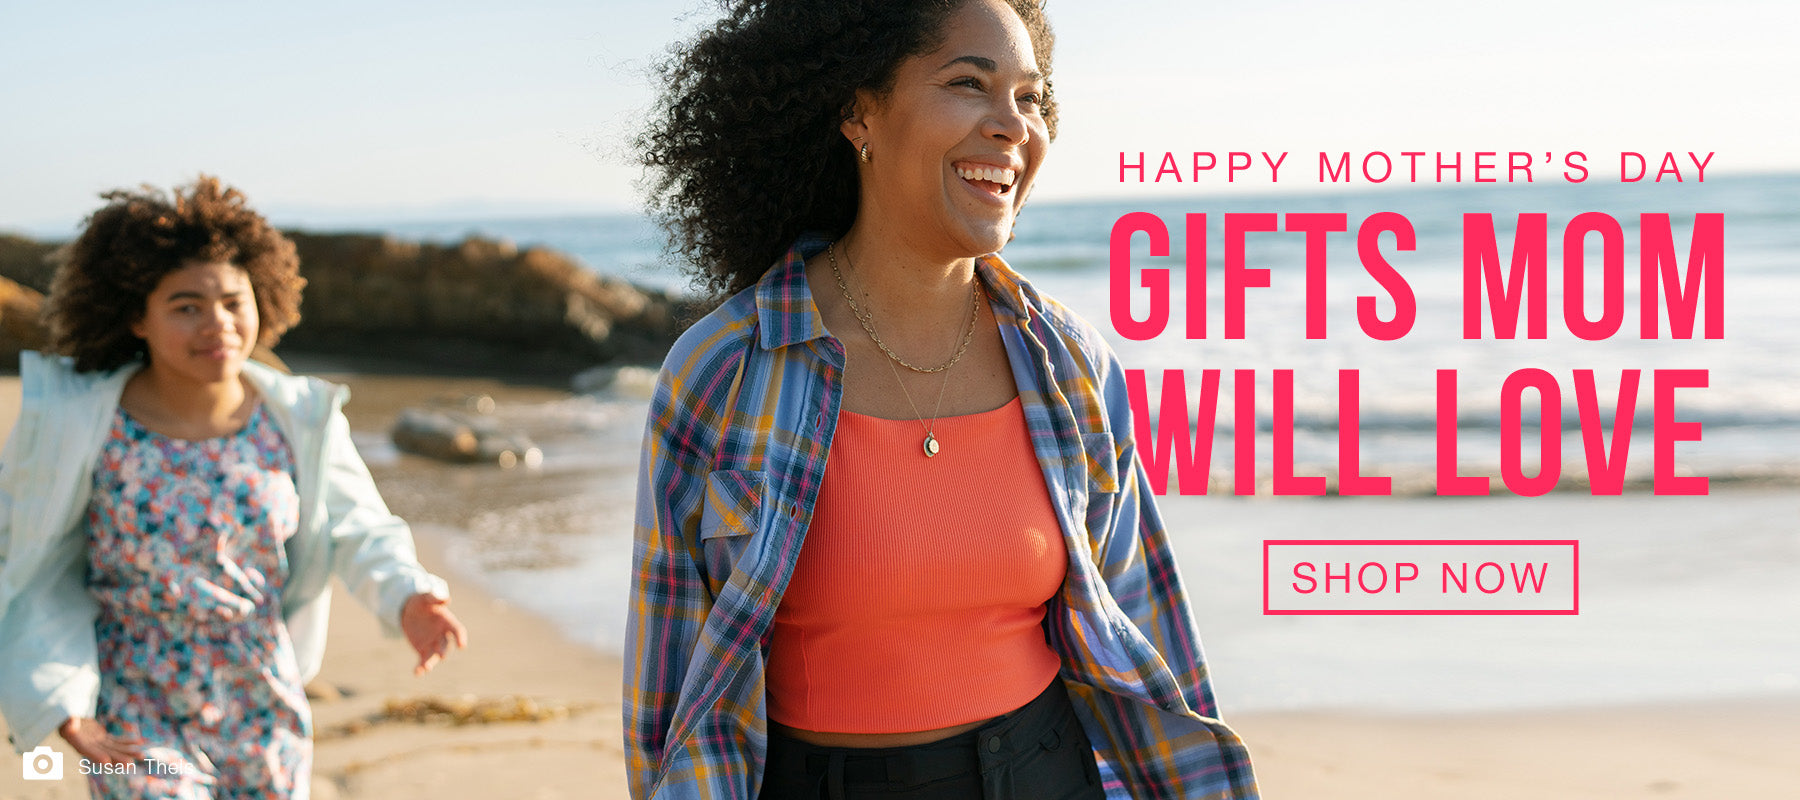 Happy Mother's Day Gifts Mom will Love Shop Now